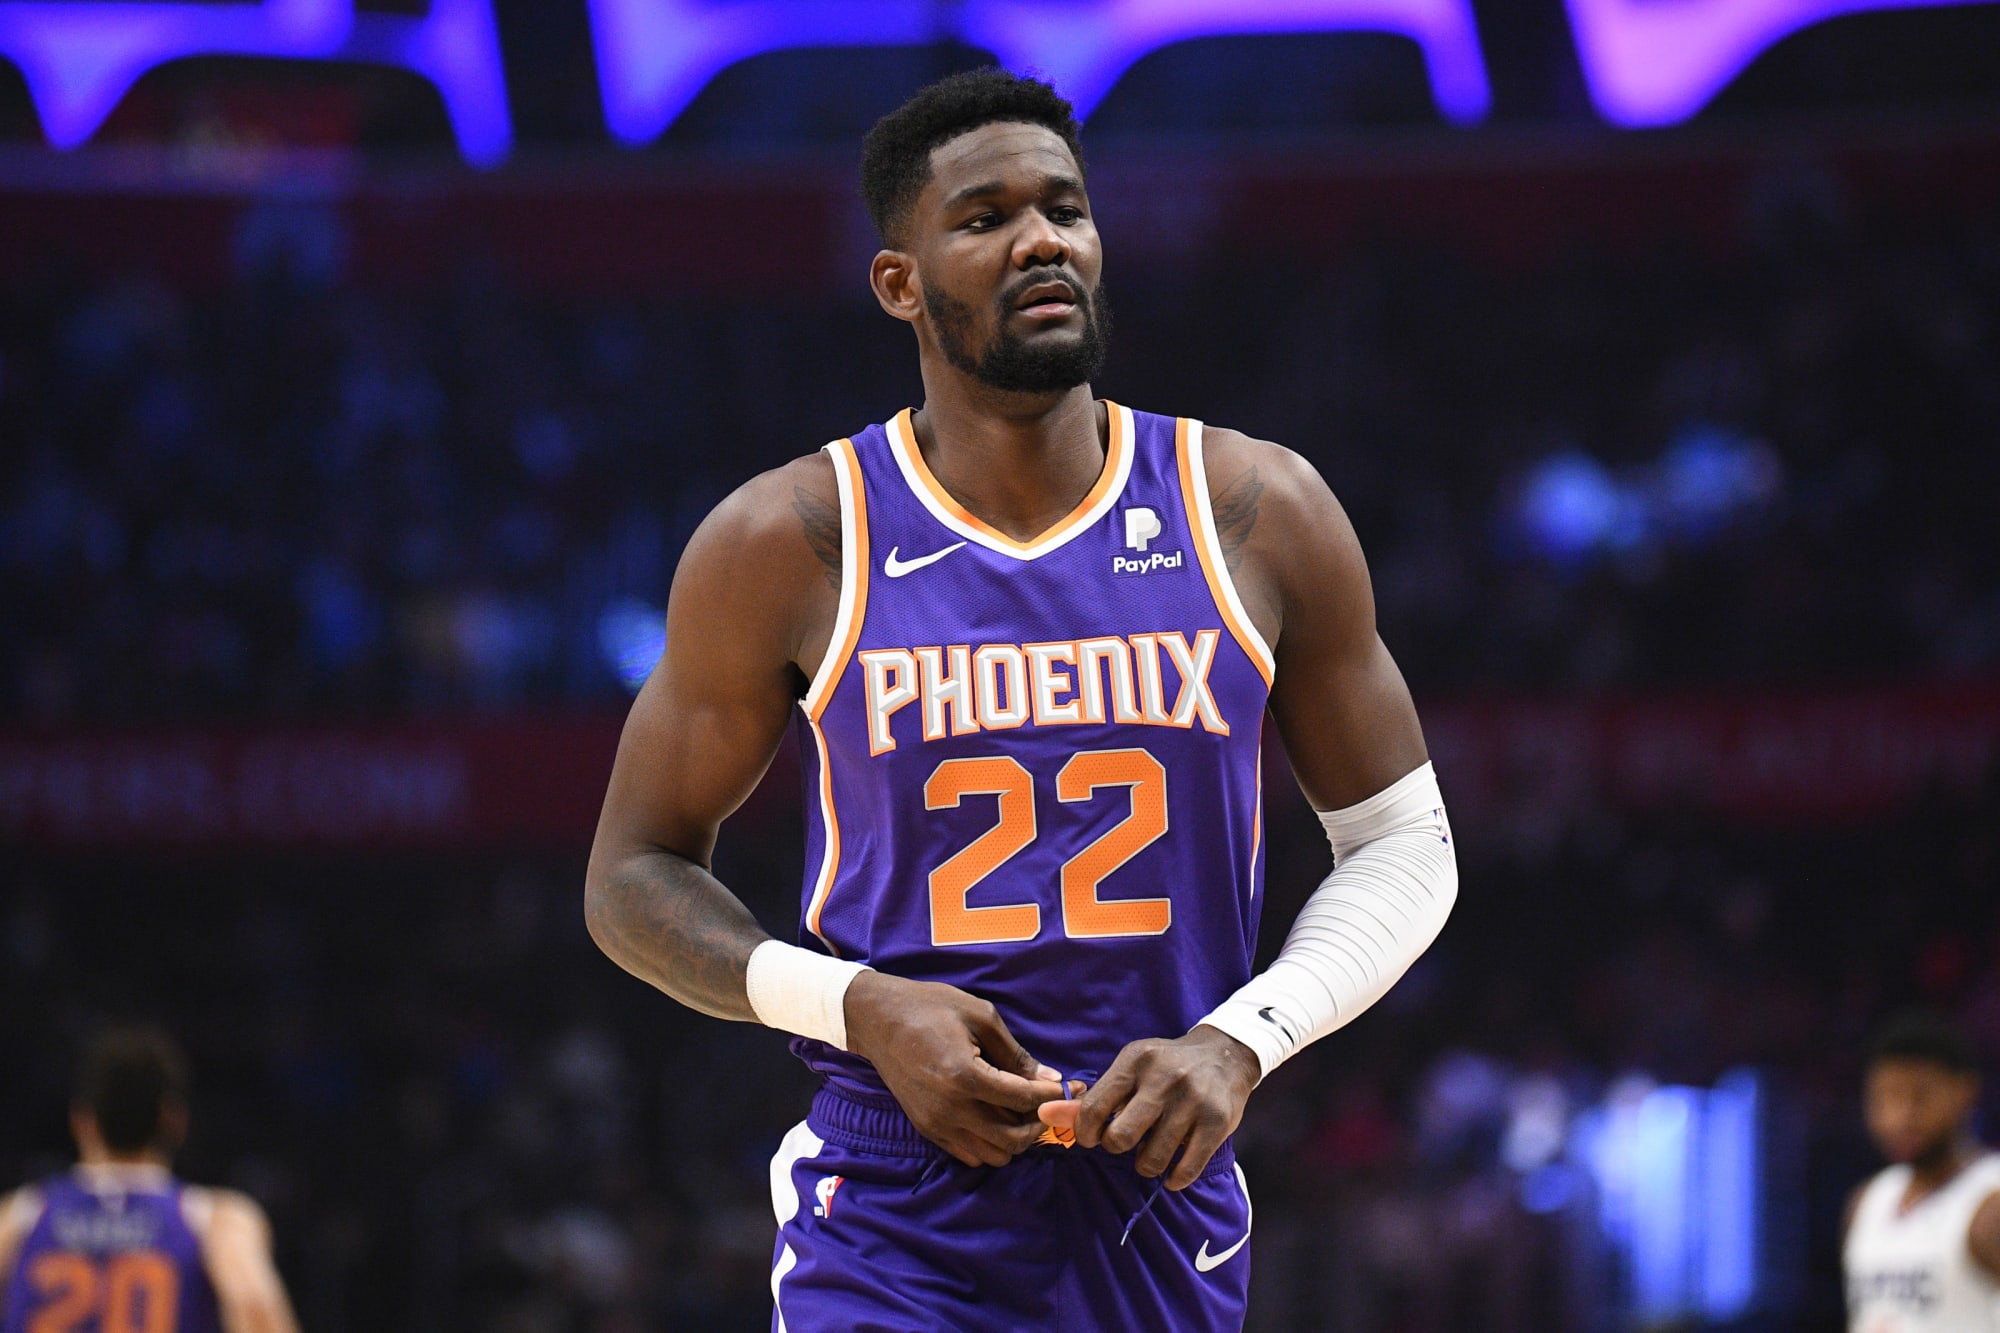 Phoenix Suns should send Ayton to the Oubre school for assertiveness